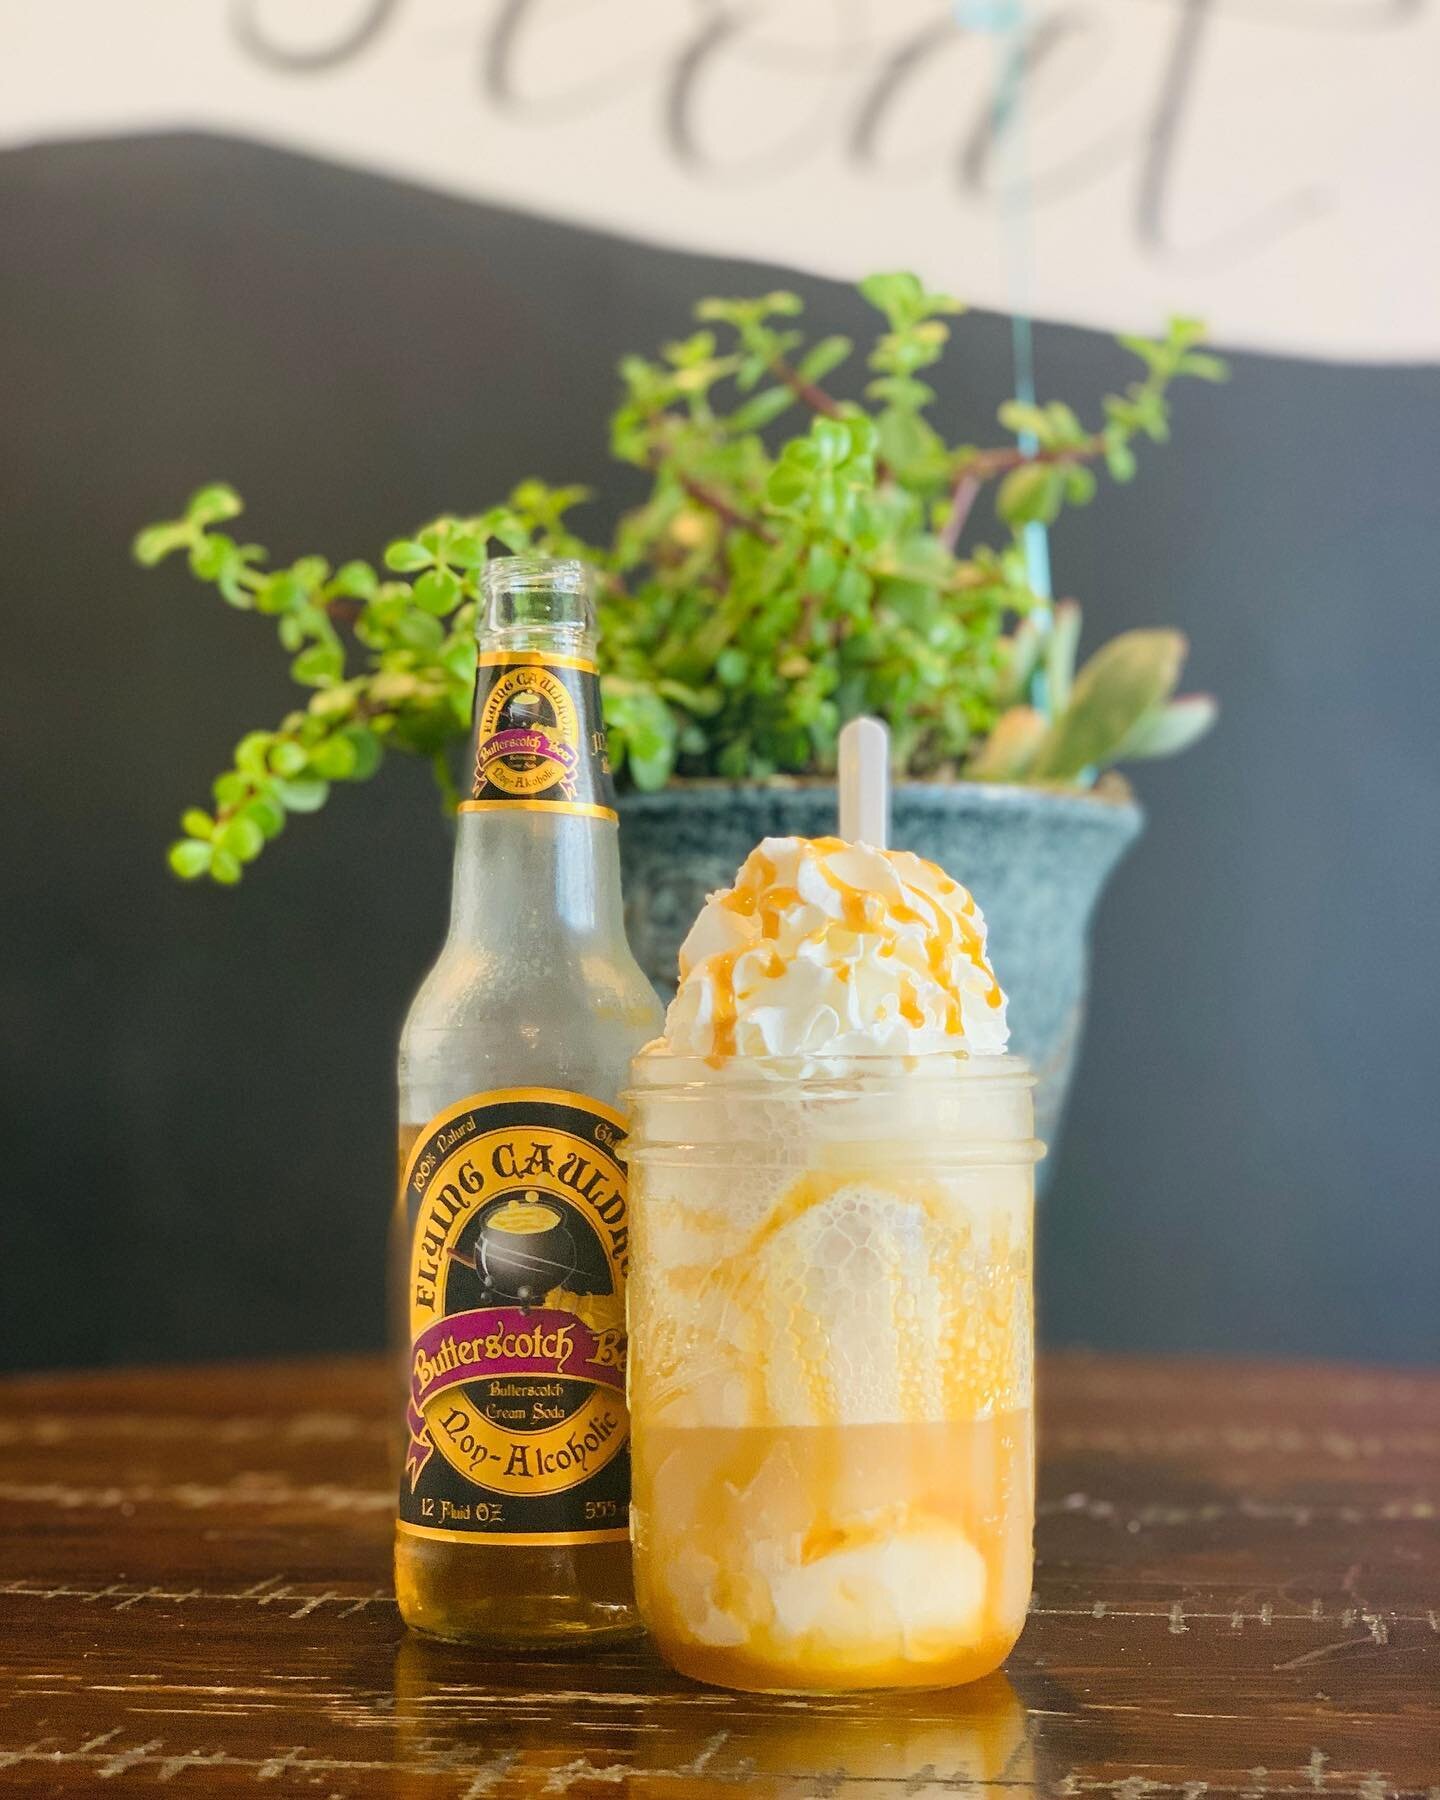 This WINGARDIUM LEVIOSA float with Salted Caramel ice cream and Butterscotch Beer will transport you into the Harry Potter world!🤩⠀
⠀
⠀
⠀
⠀
⠀
#floatcoffeeshop #floatpasadena #harrypotter #harrypotterfloat #wingardiumleviosa #saltedcaramelicecream #b